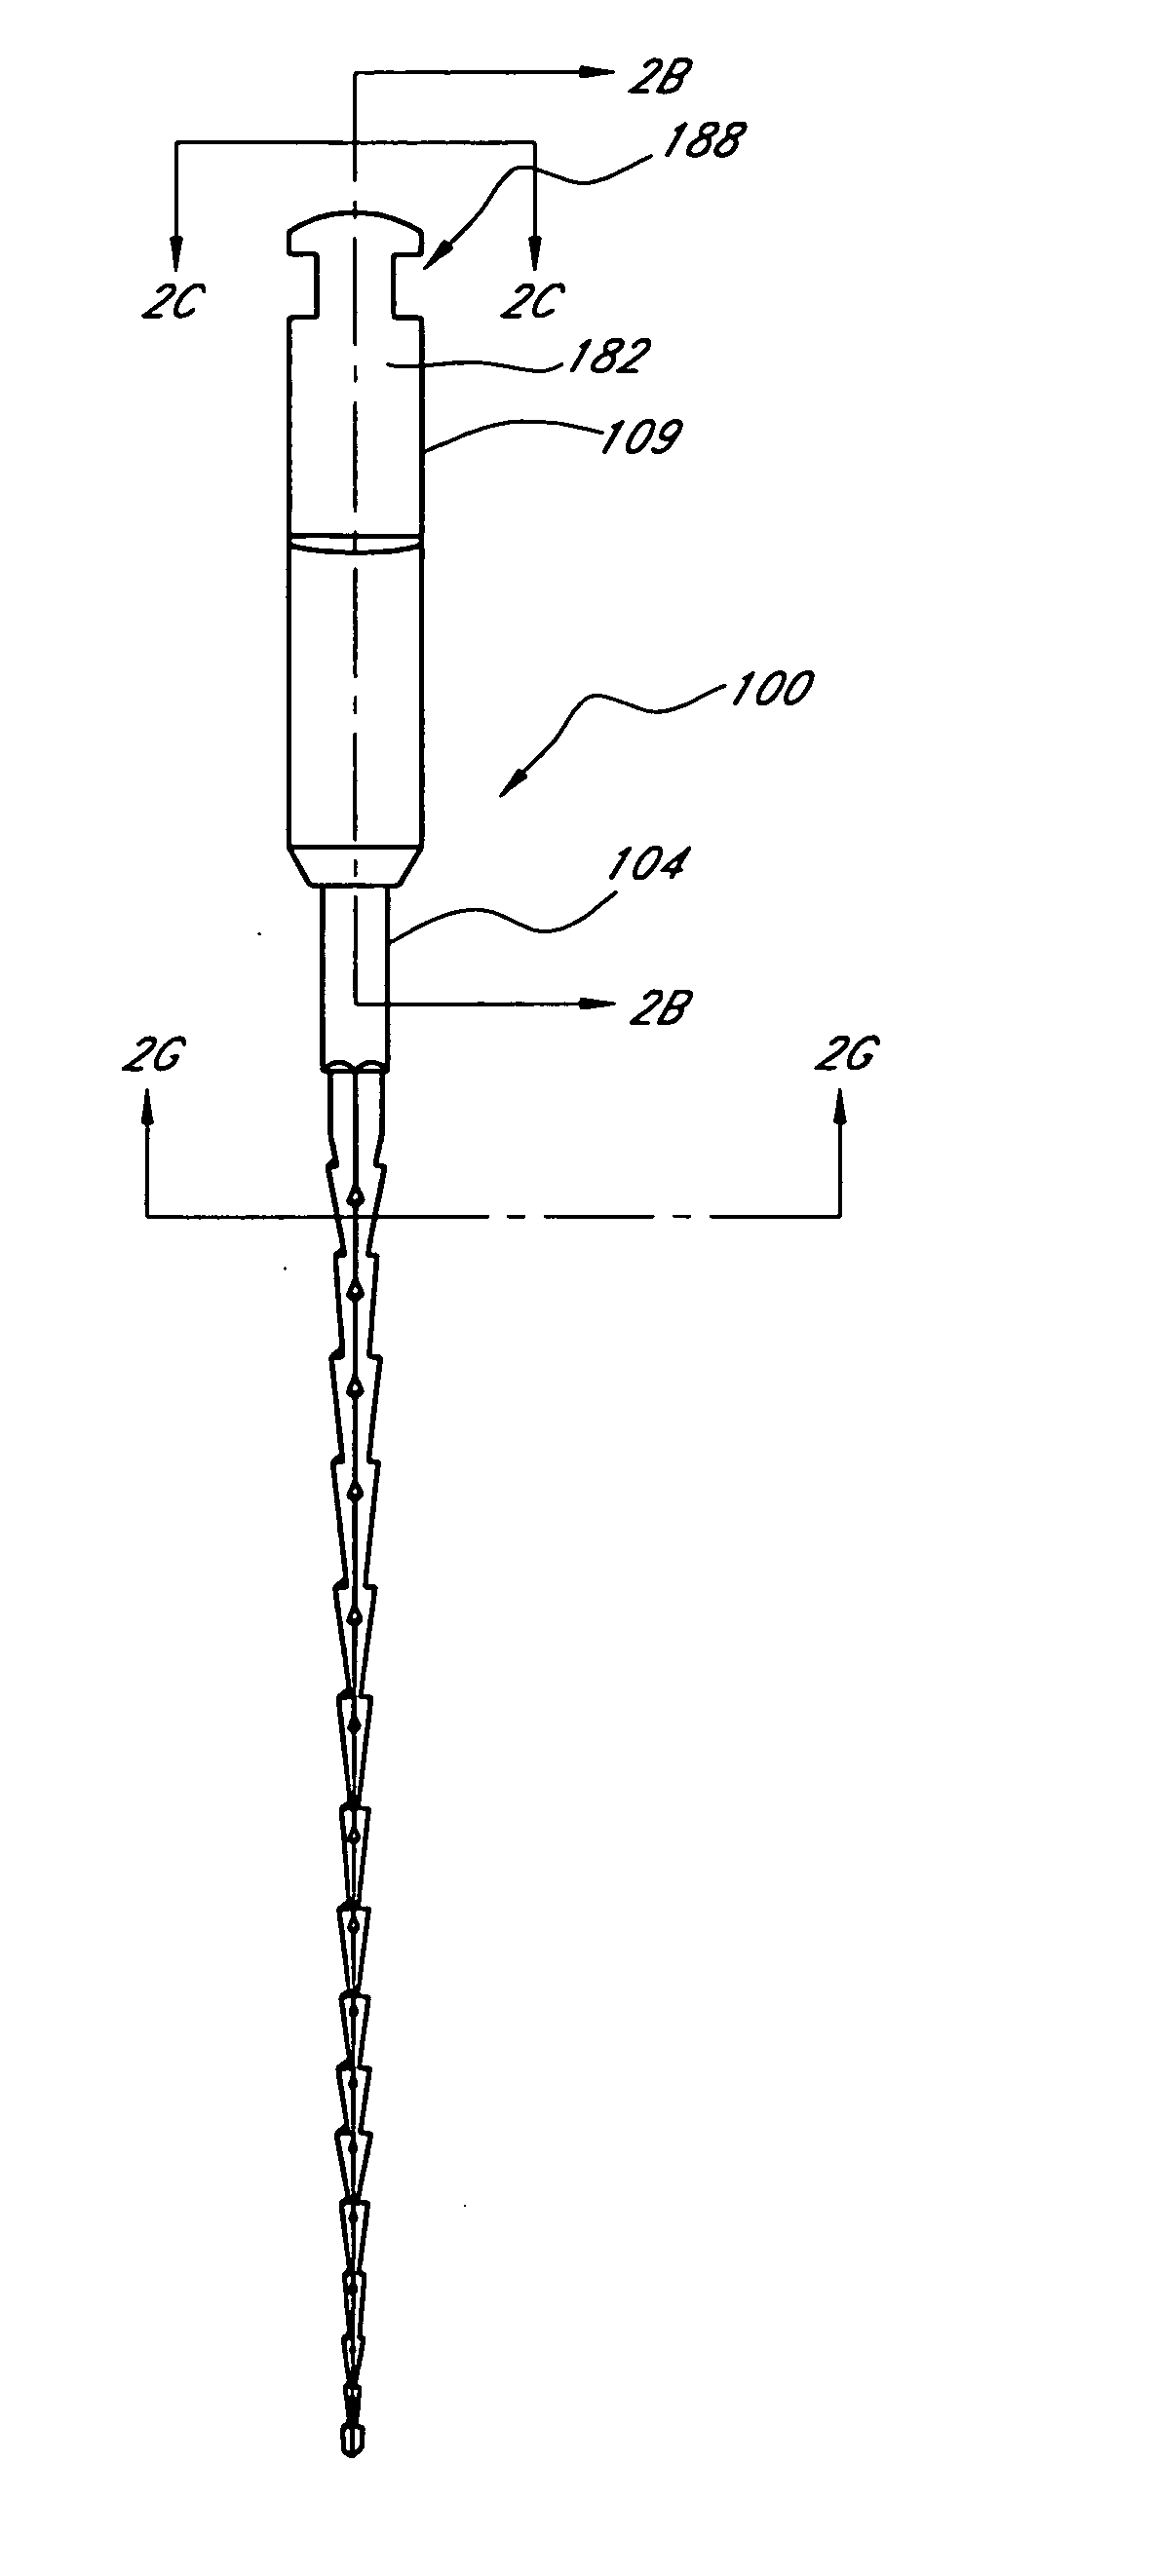 Endodontic instrument having notched cutting surfaces